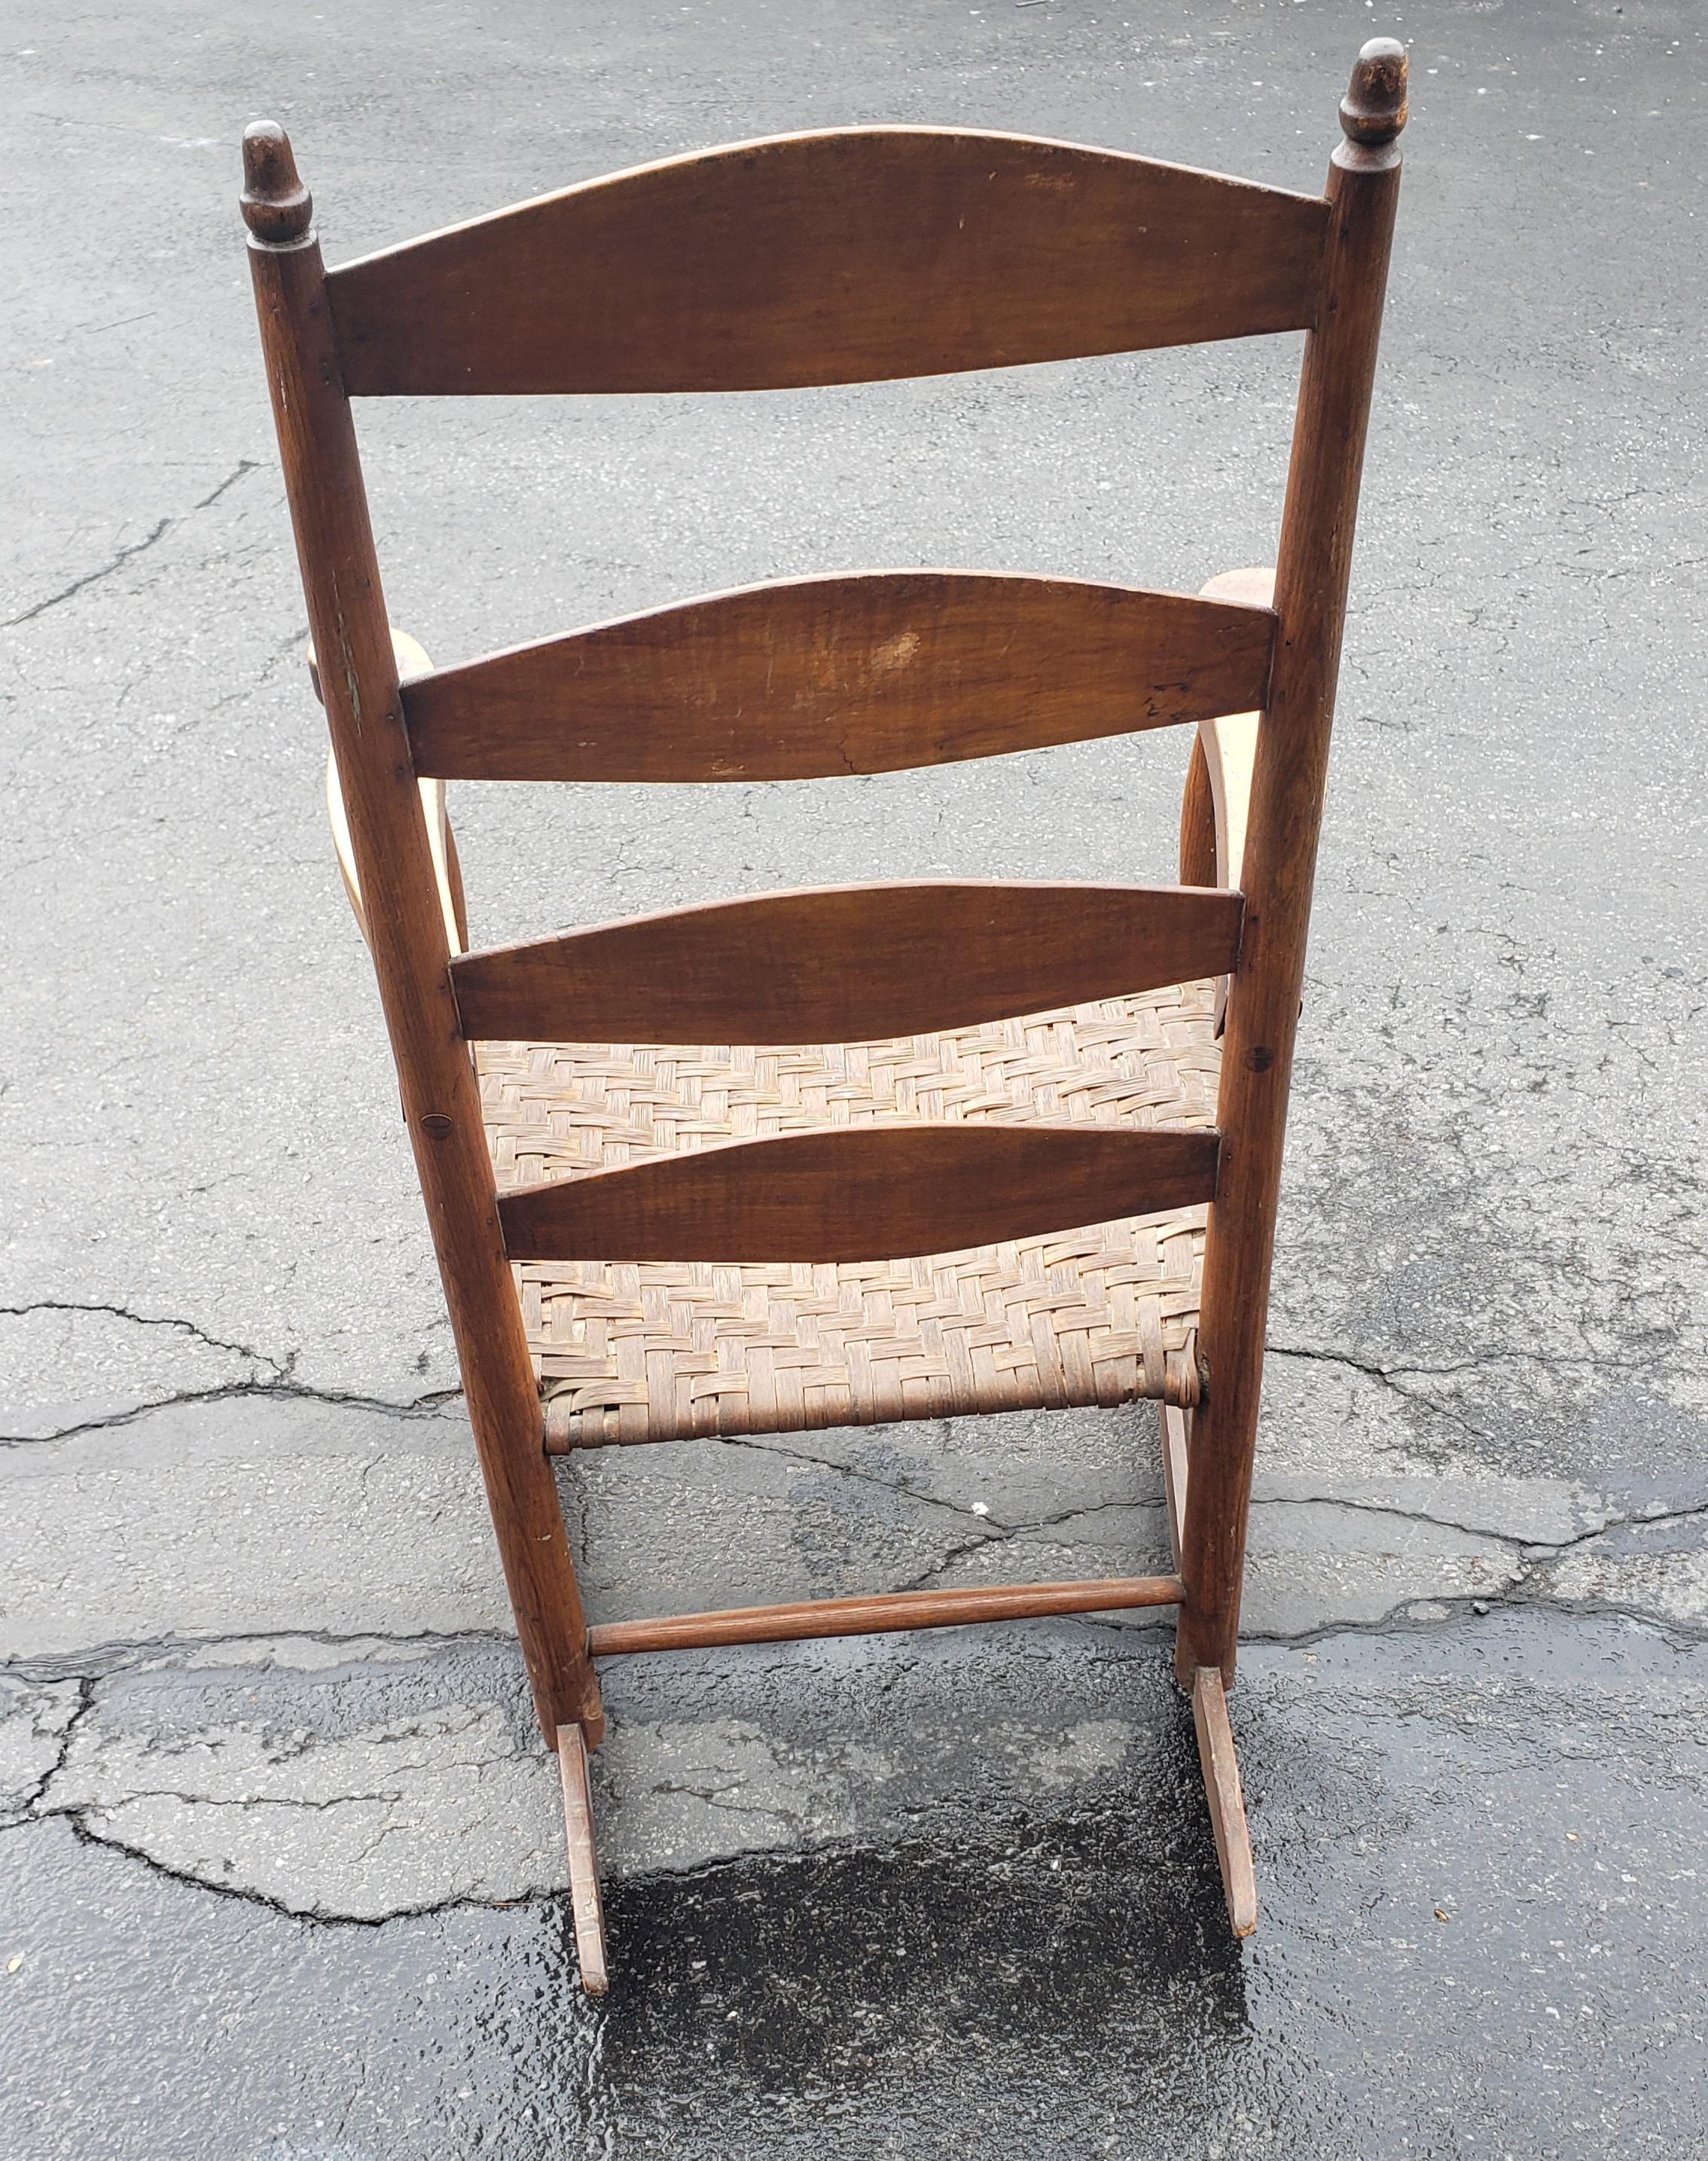 Early American Walnut Ladder Back Rocking Chair w/ Double Sided Split Reed Seat For Sale 3